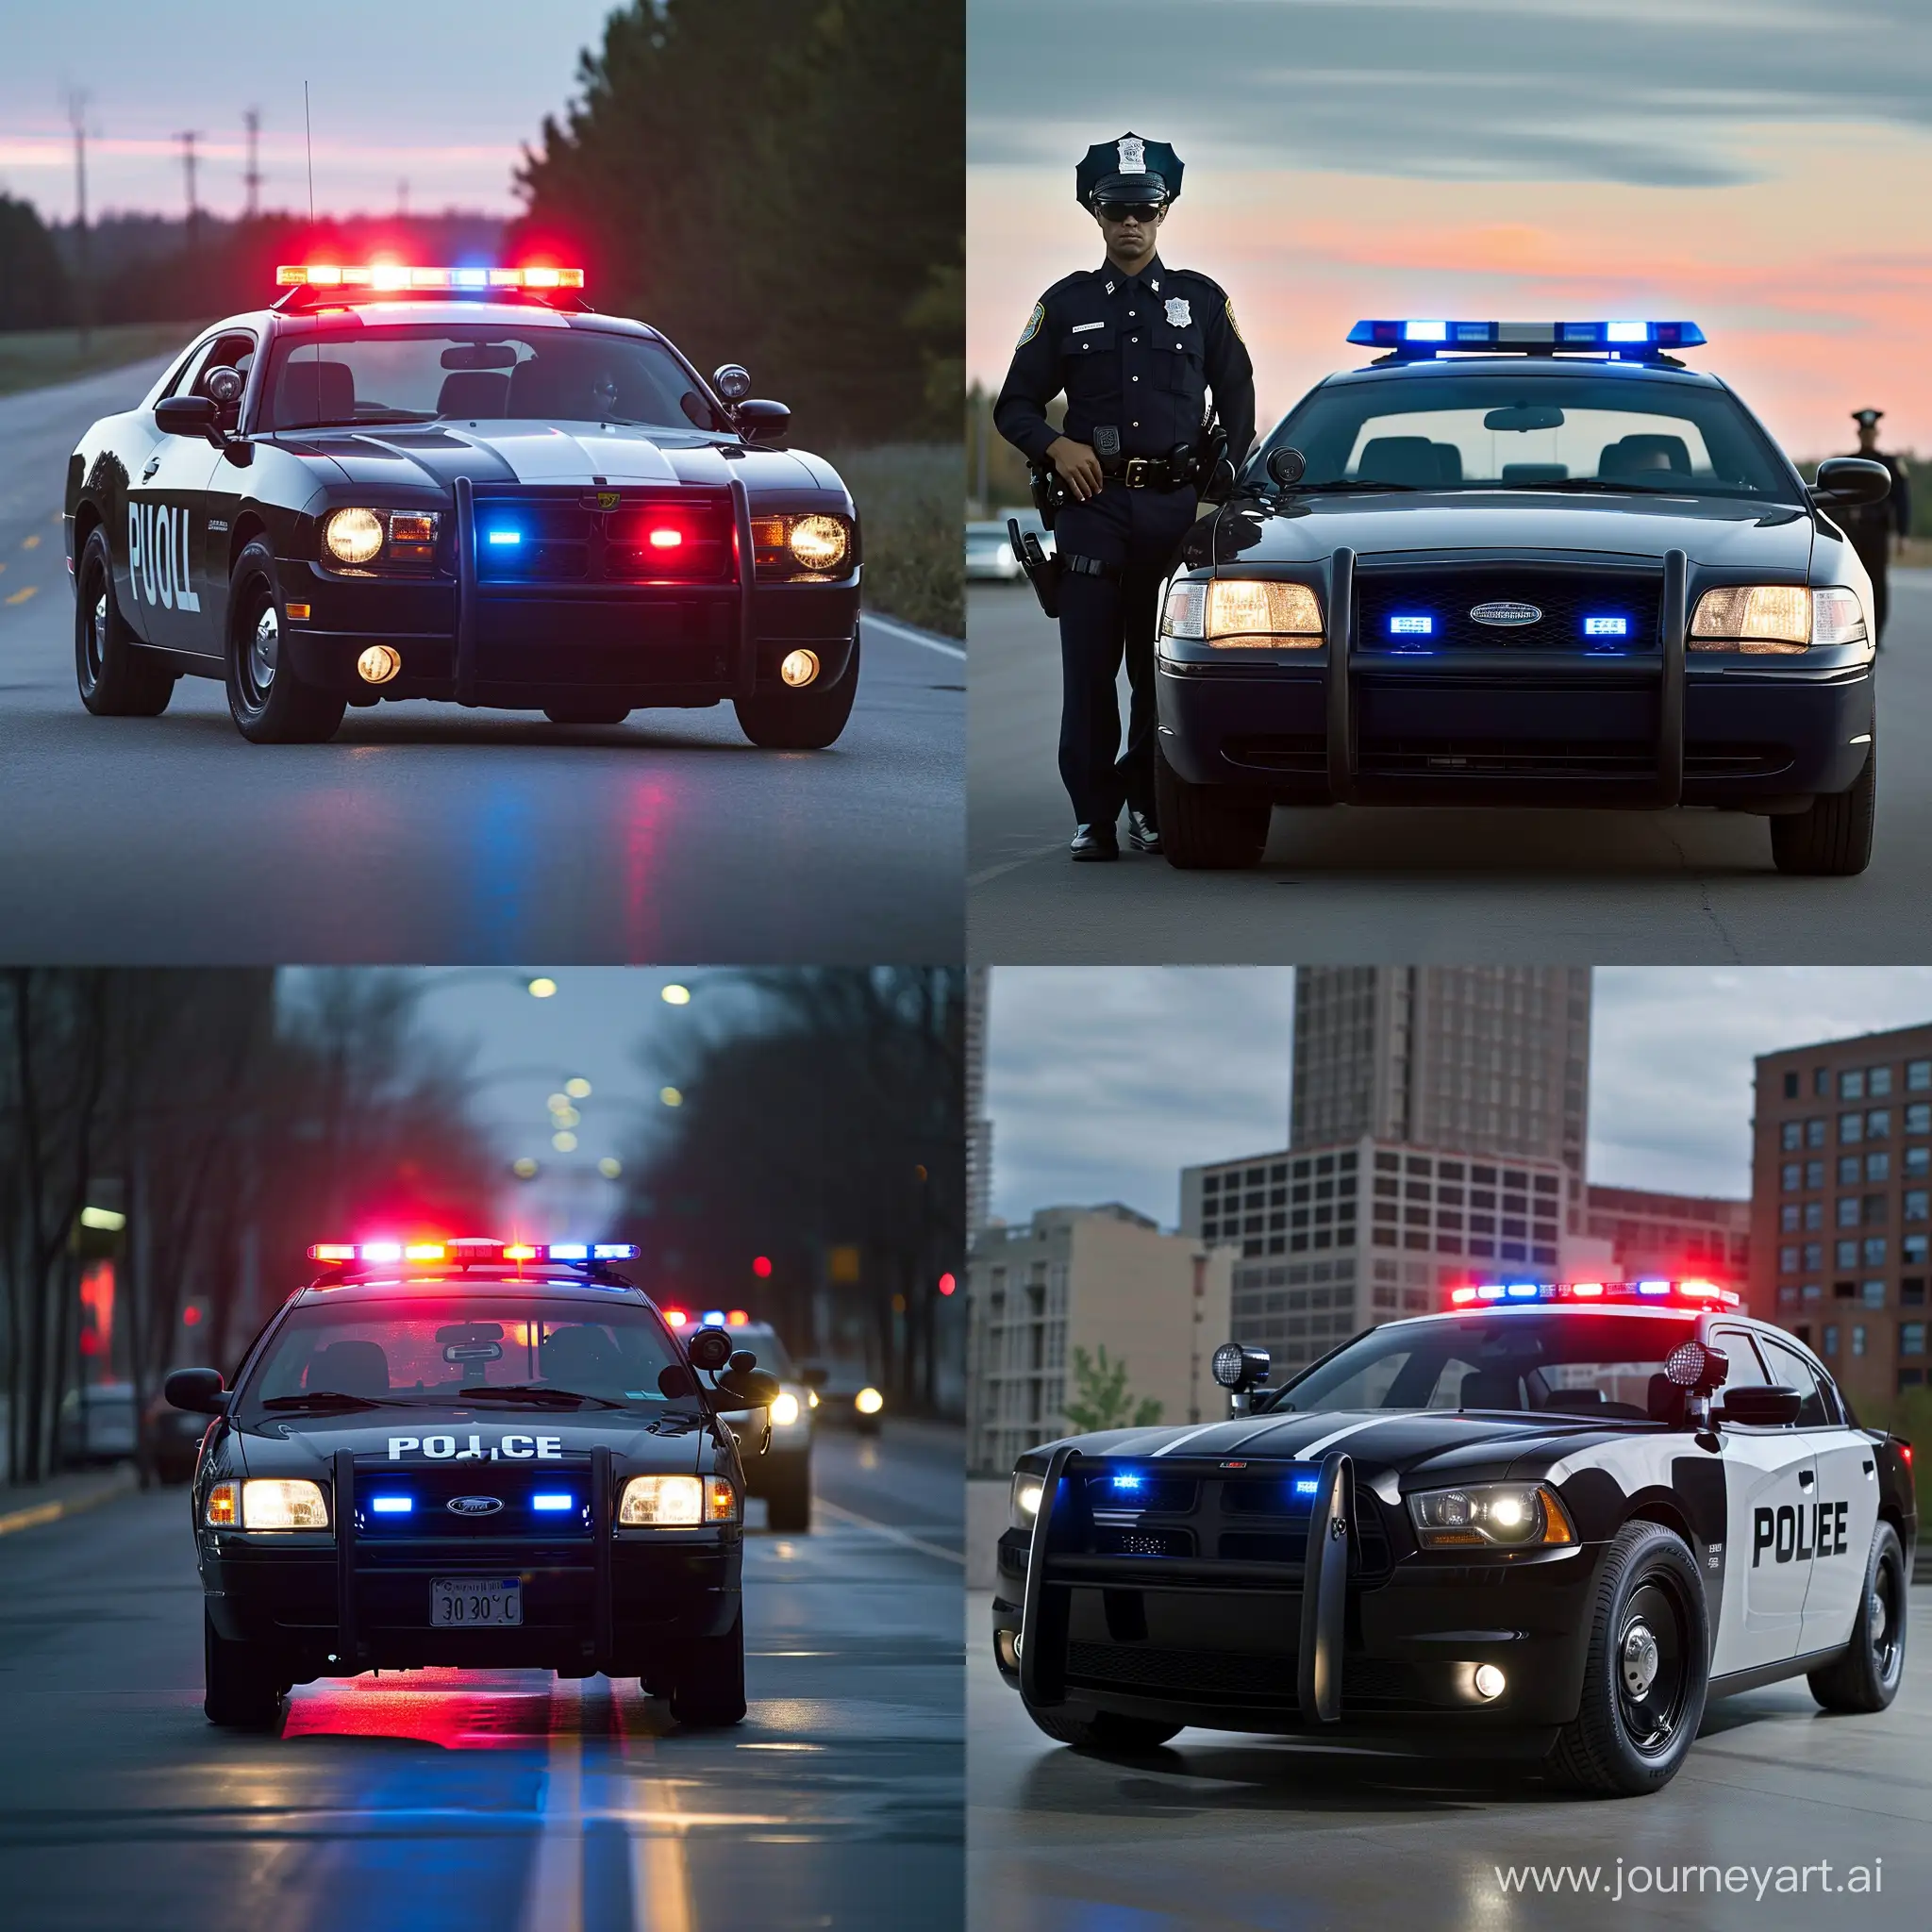 Police-Car-in-Action-HighSpeed-Pursuit-in-a-Dynamic-Scene